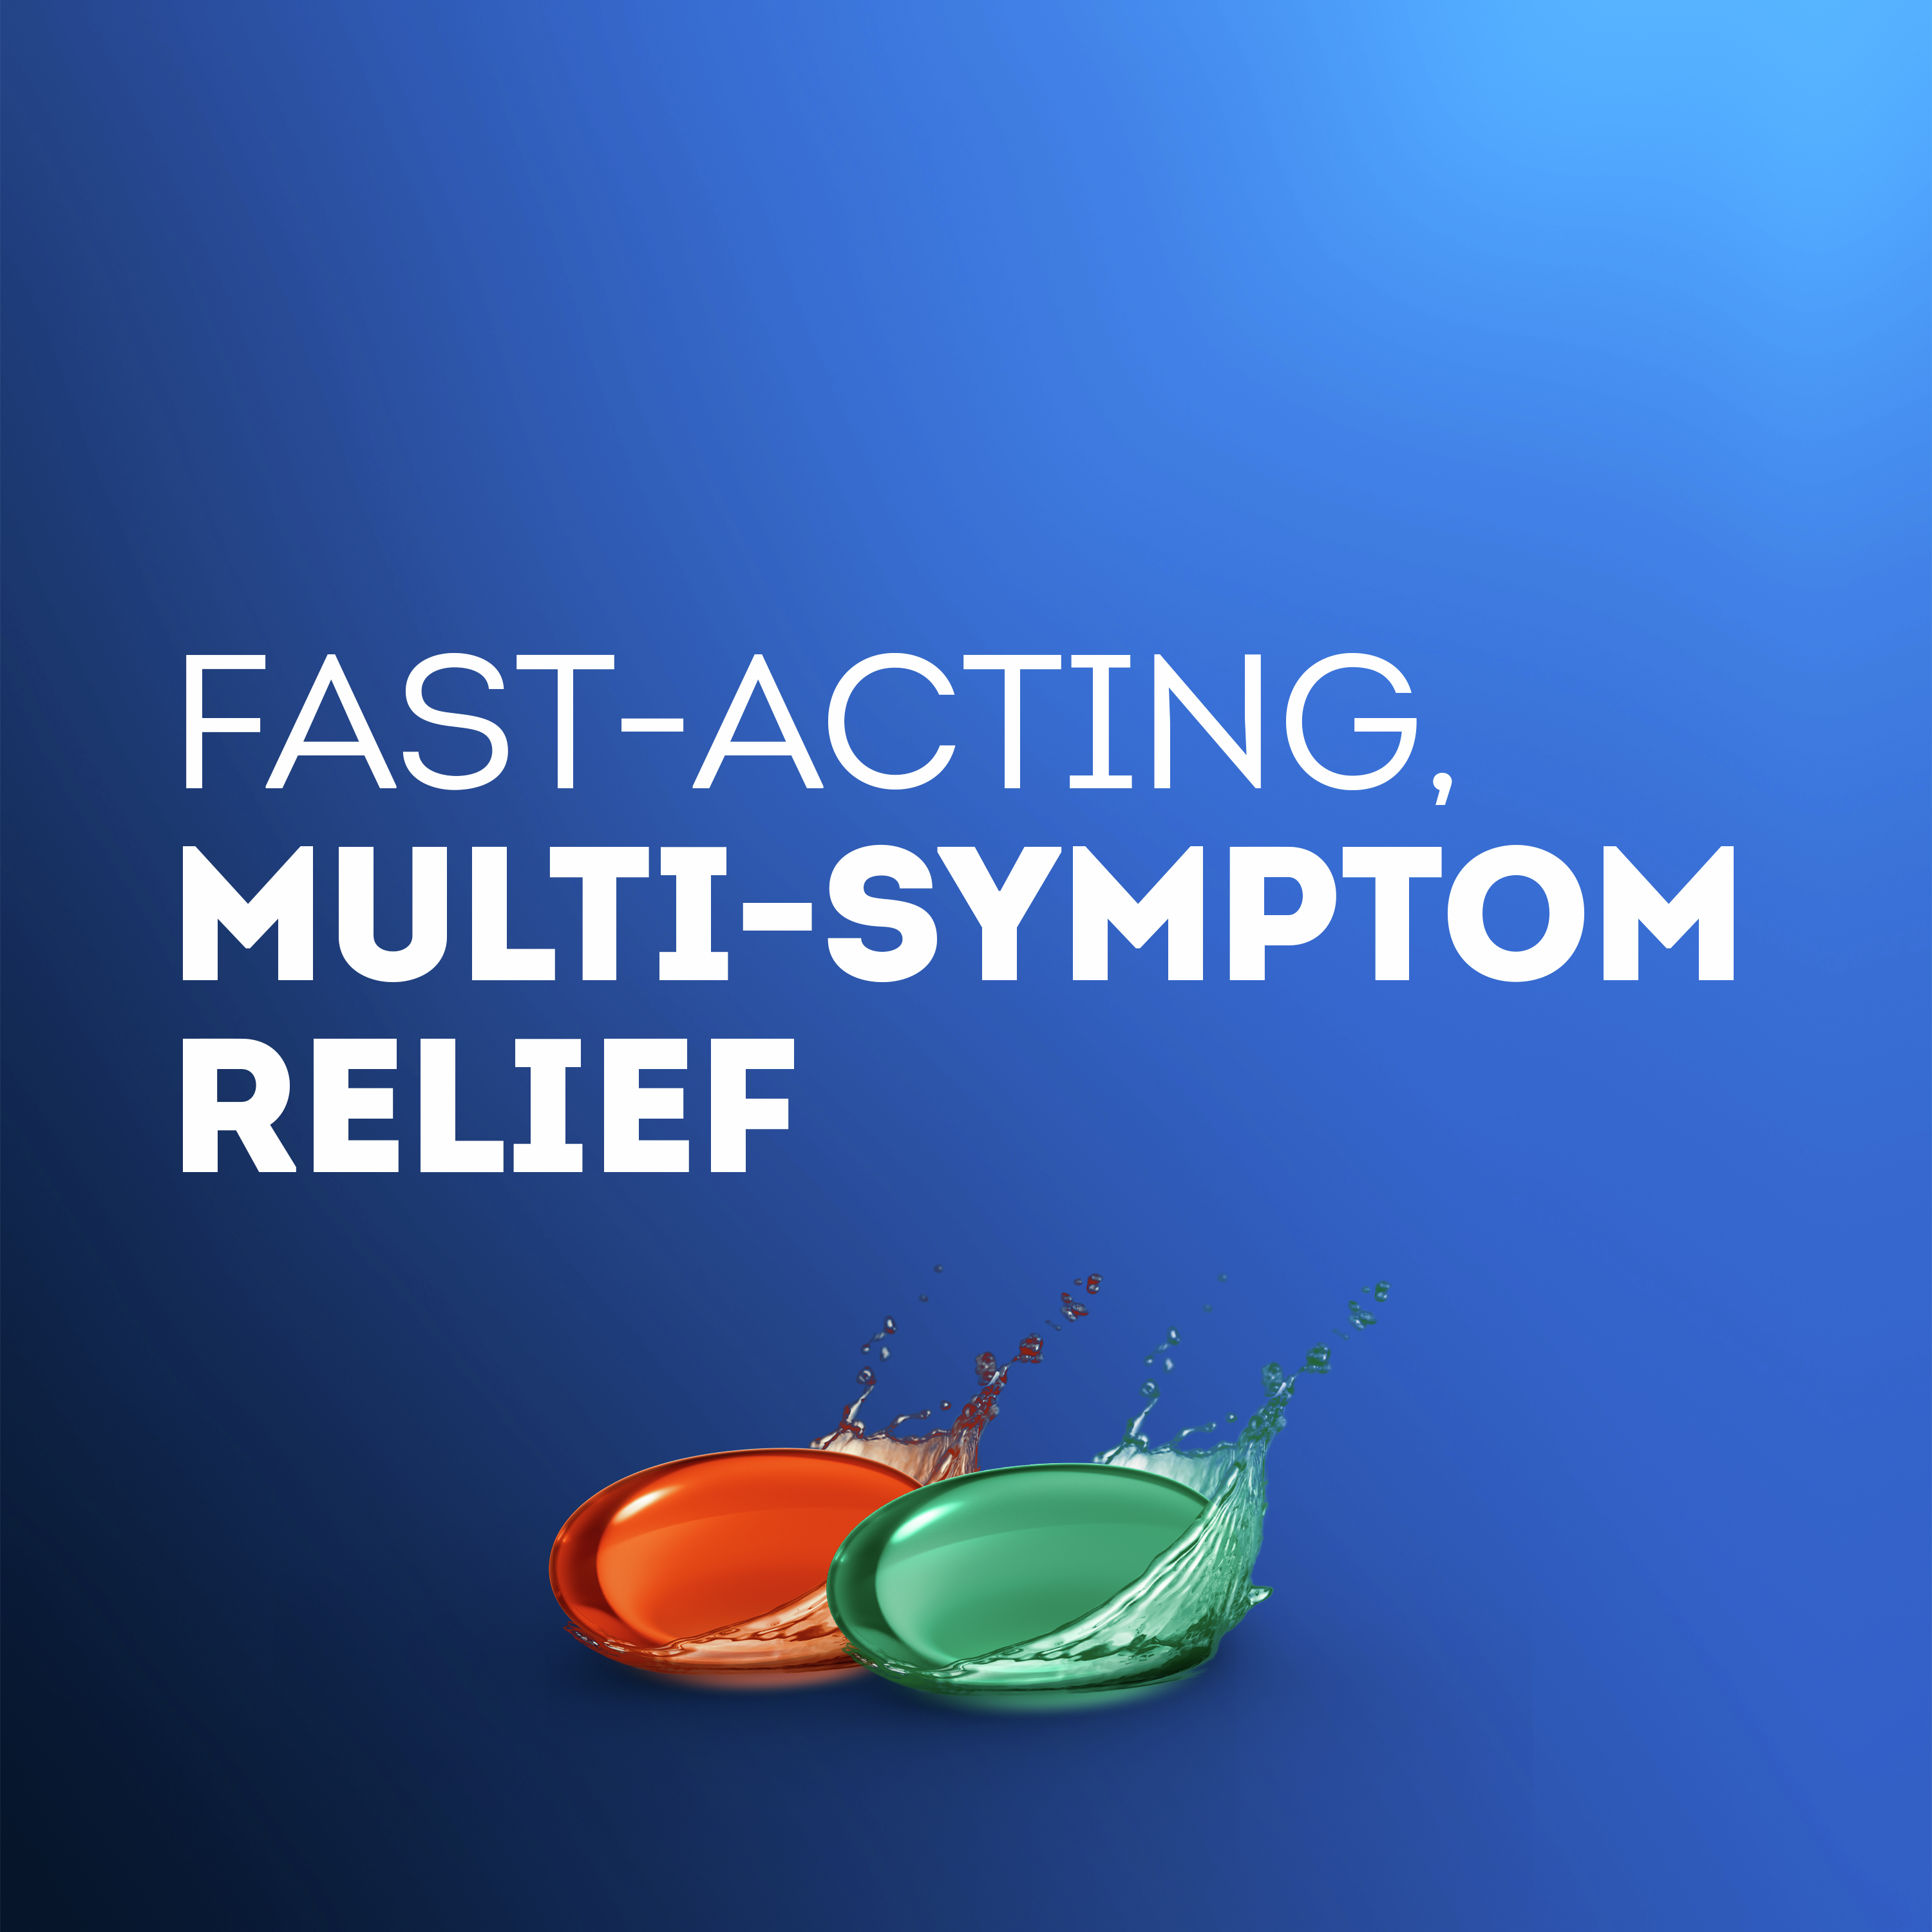 DayQuil™/ NyQuil™ SEVERE Cold & Flu Relief LiquiCaps™ Co-Pack